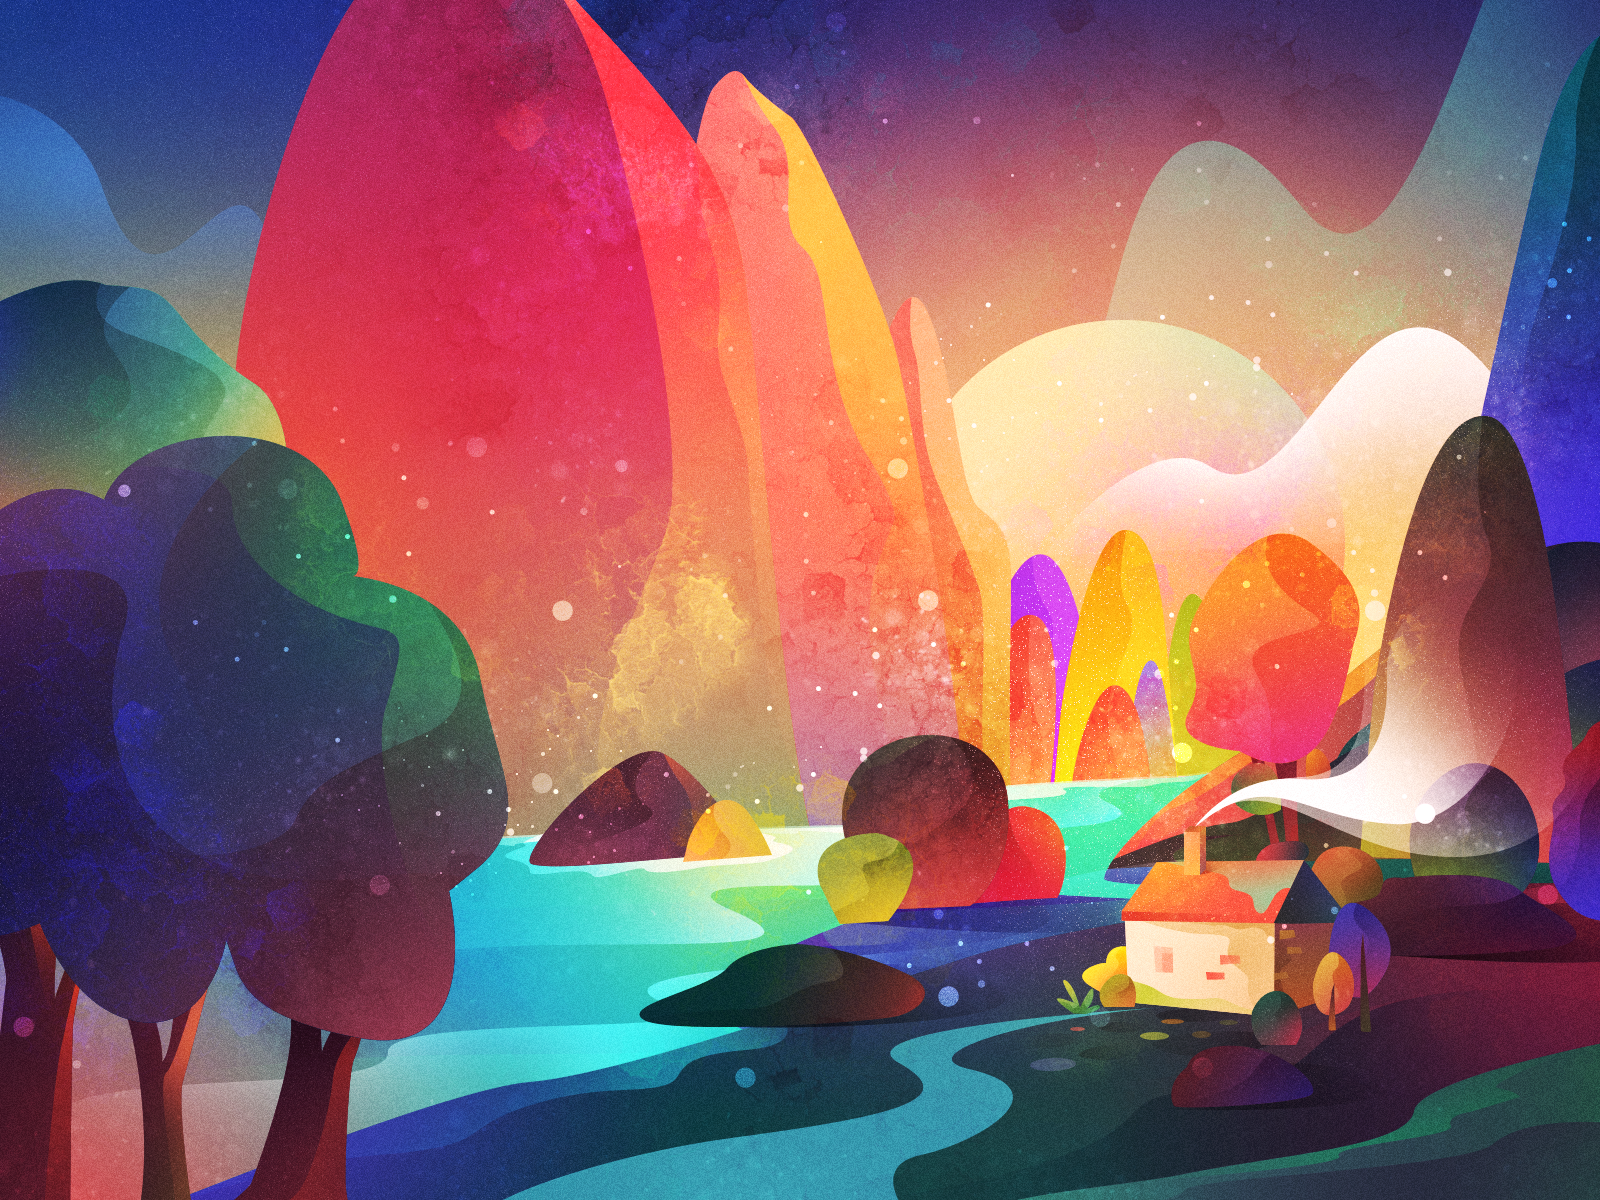 Valley Illustration by J.HUA for Tunan on Dribbble